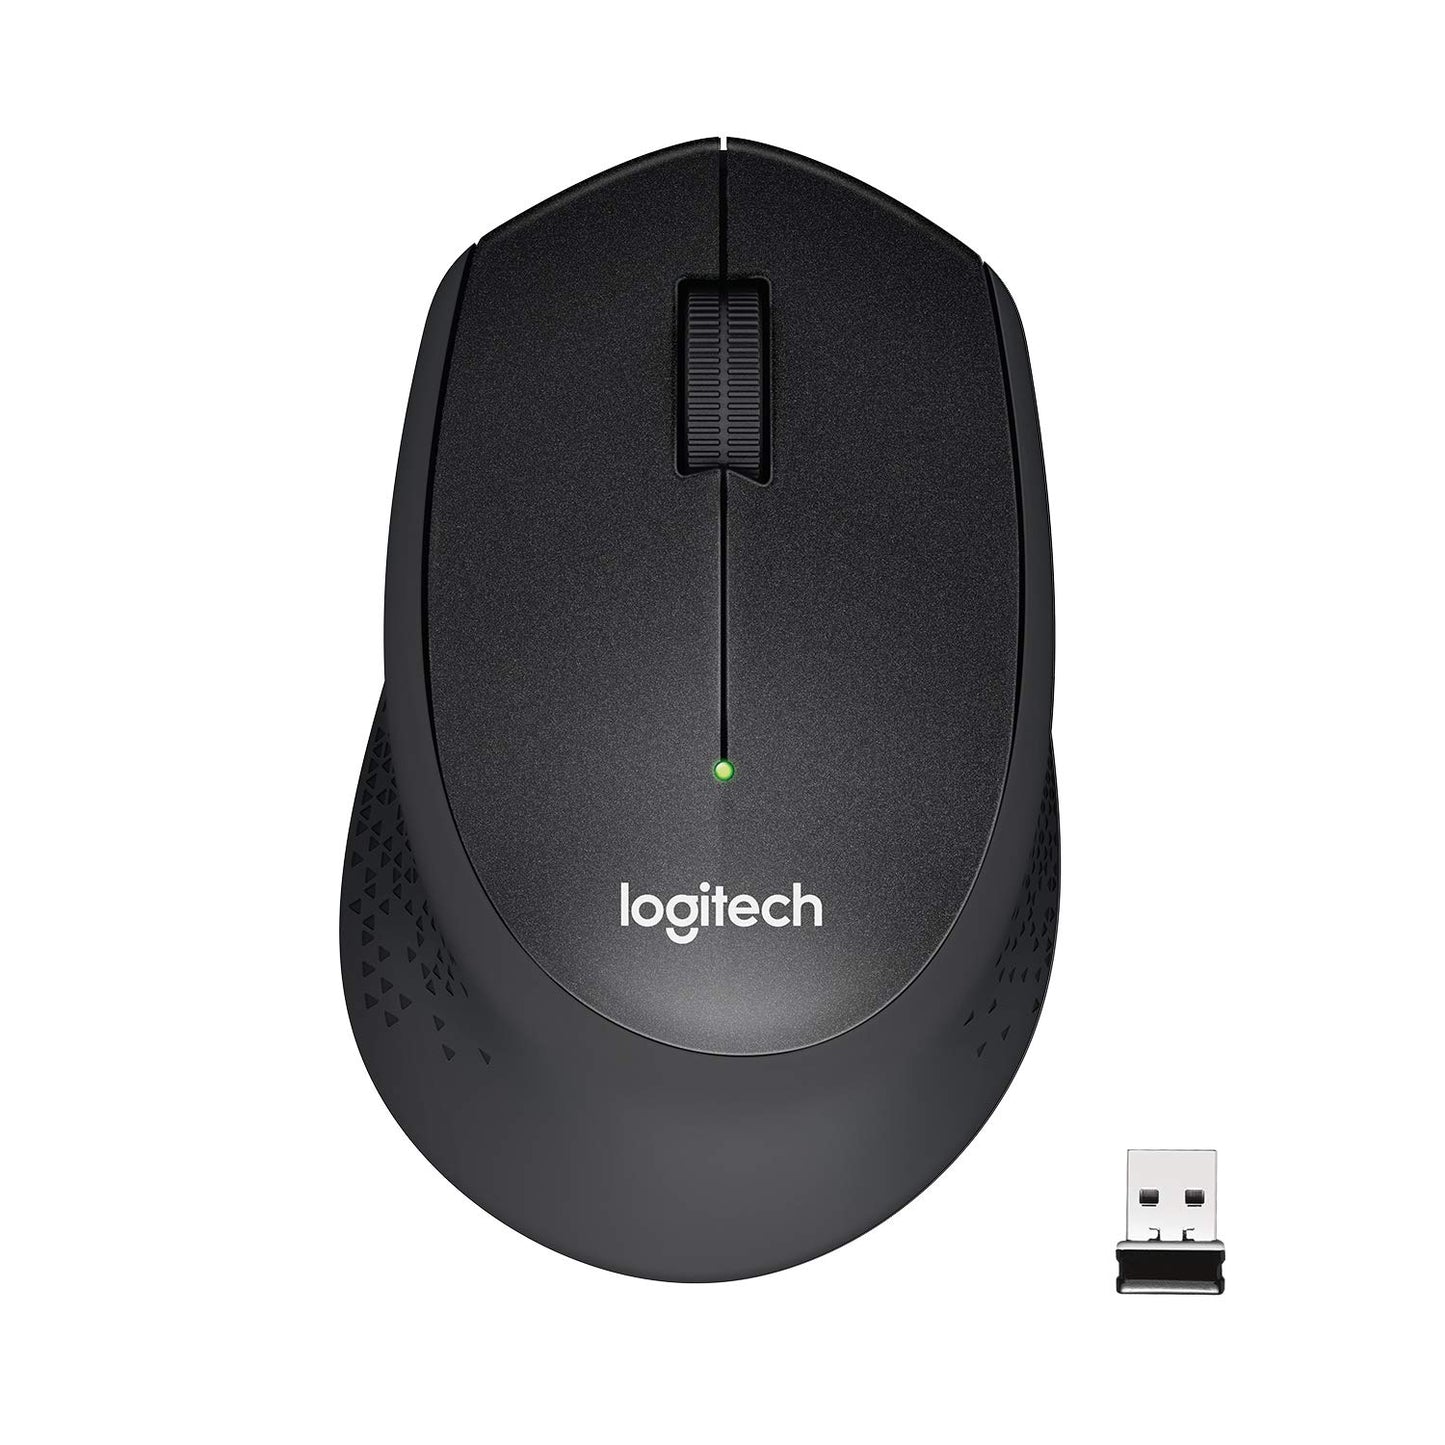 Logitech M331 Silent Plus Wireless Optical Mouse Black with 1000DPI and 2.4 GHz Technology